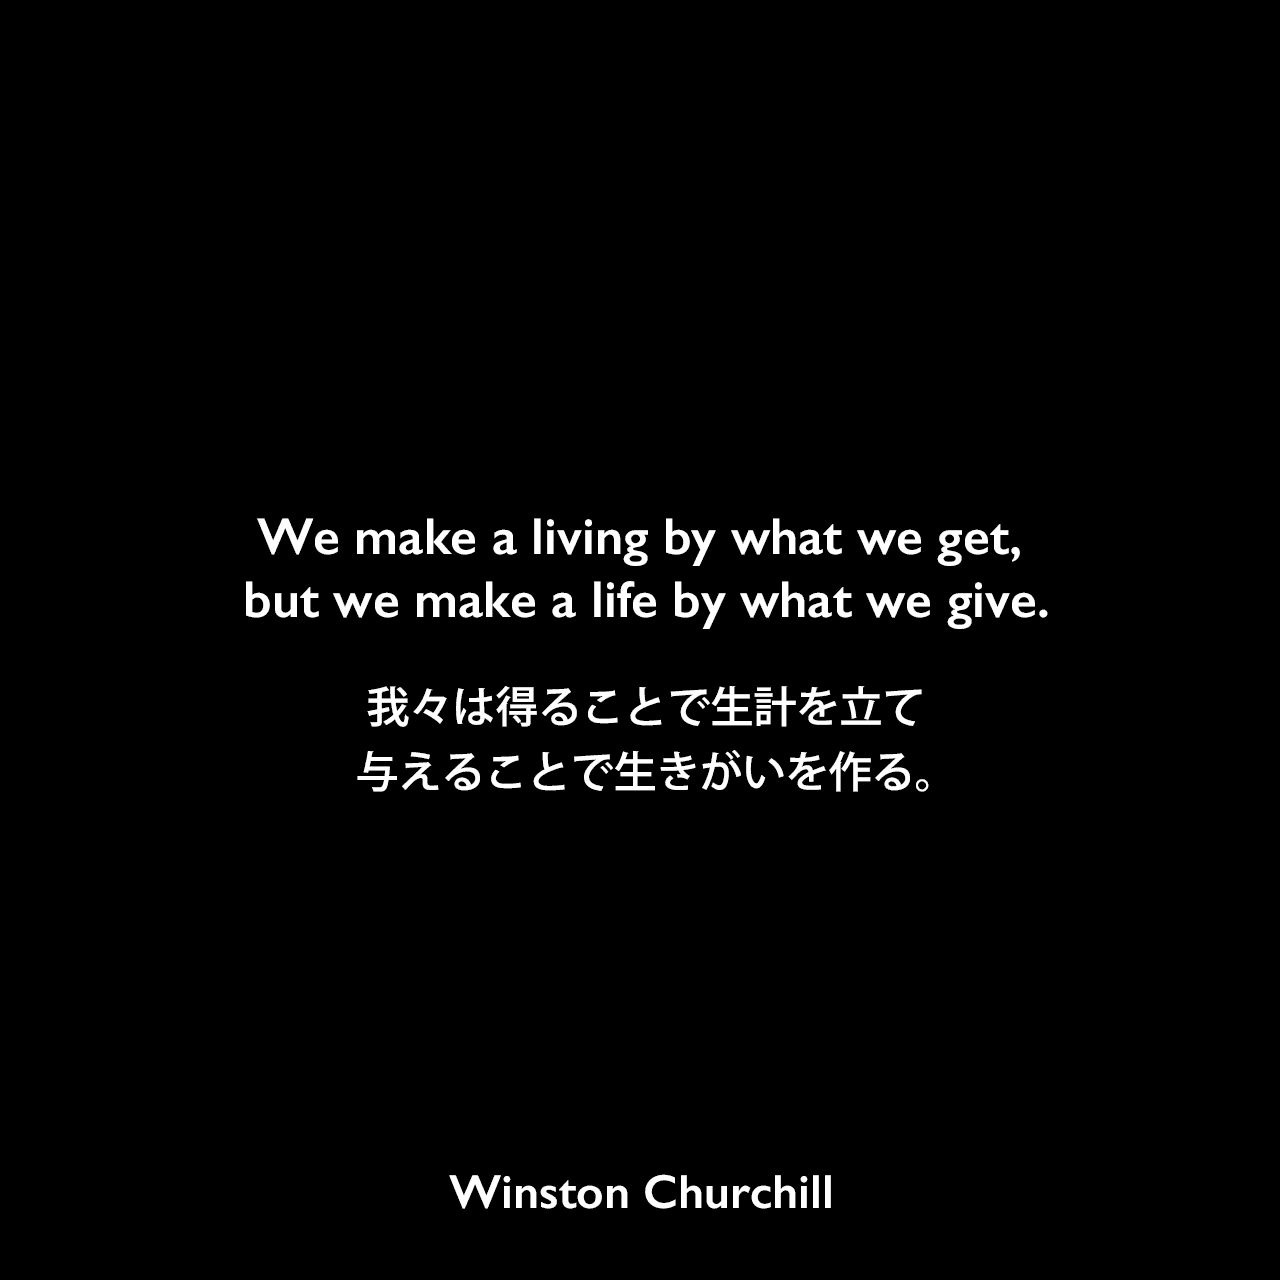 We make a living by what we get, but we make a life by what we give.我々は得ることで生計を立て、与えることで生きがいを作る。Winston Churchill